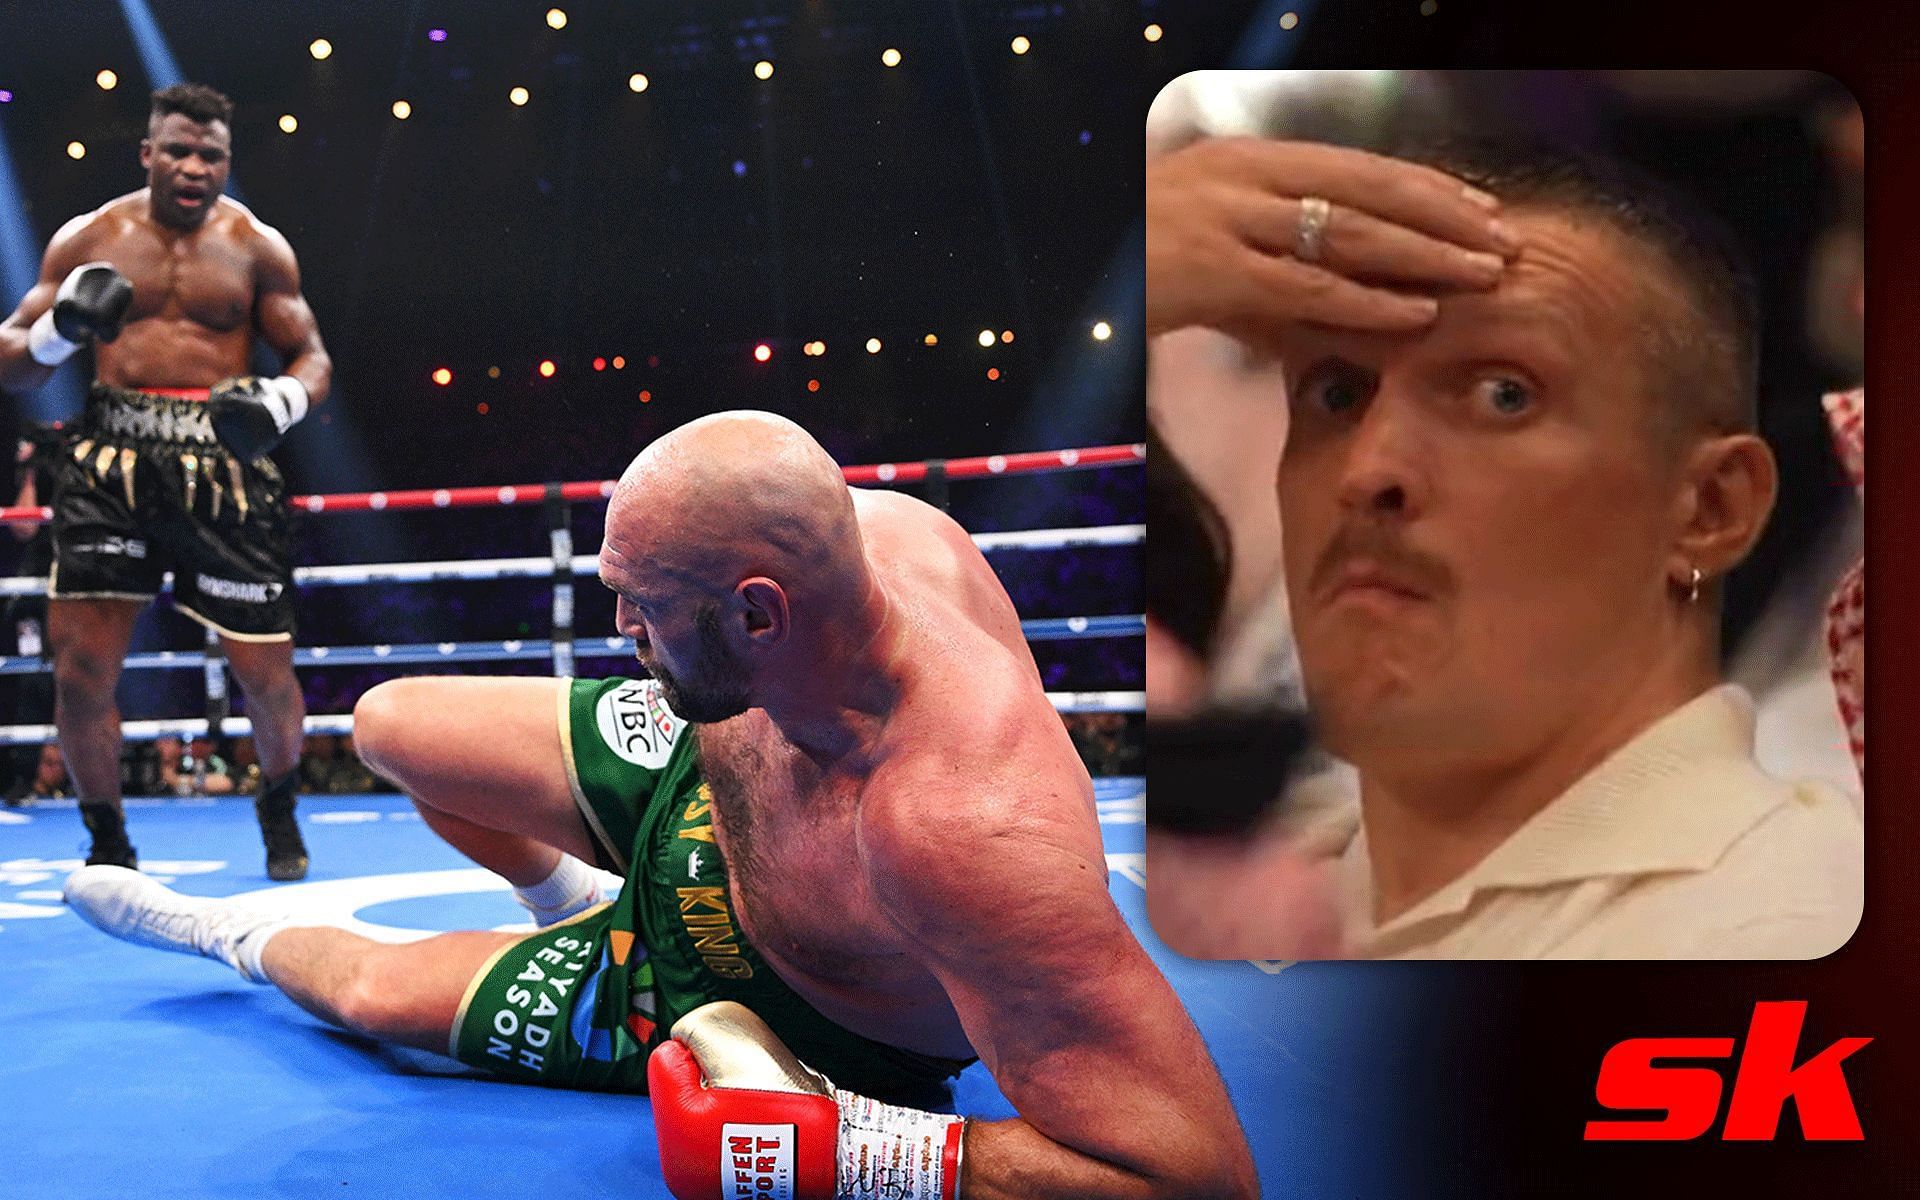 Oleksandr Usyk's expression of utter shock as Tyson Fury gets dropped